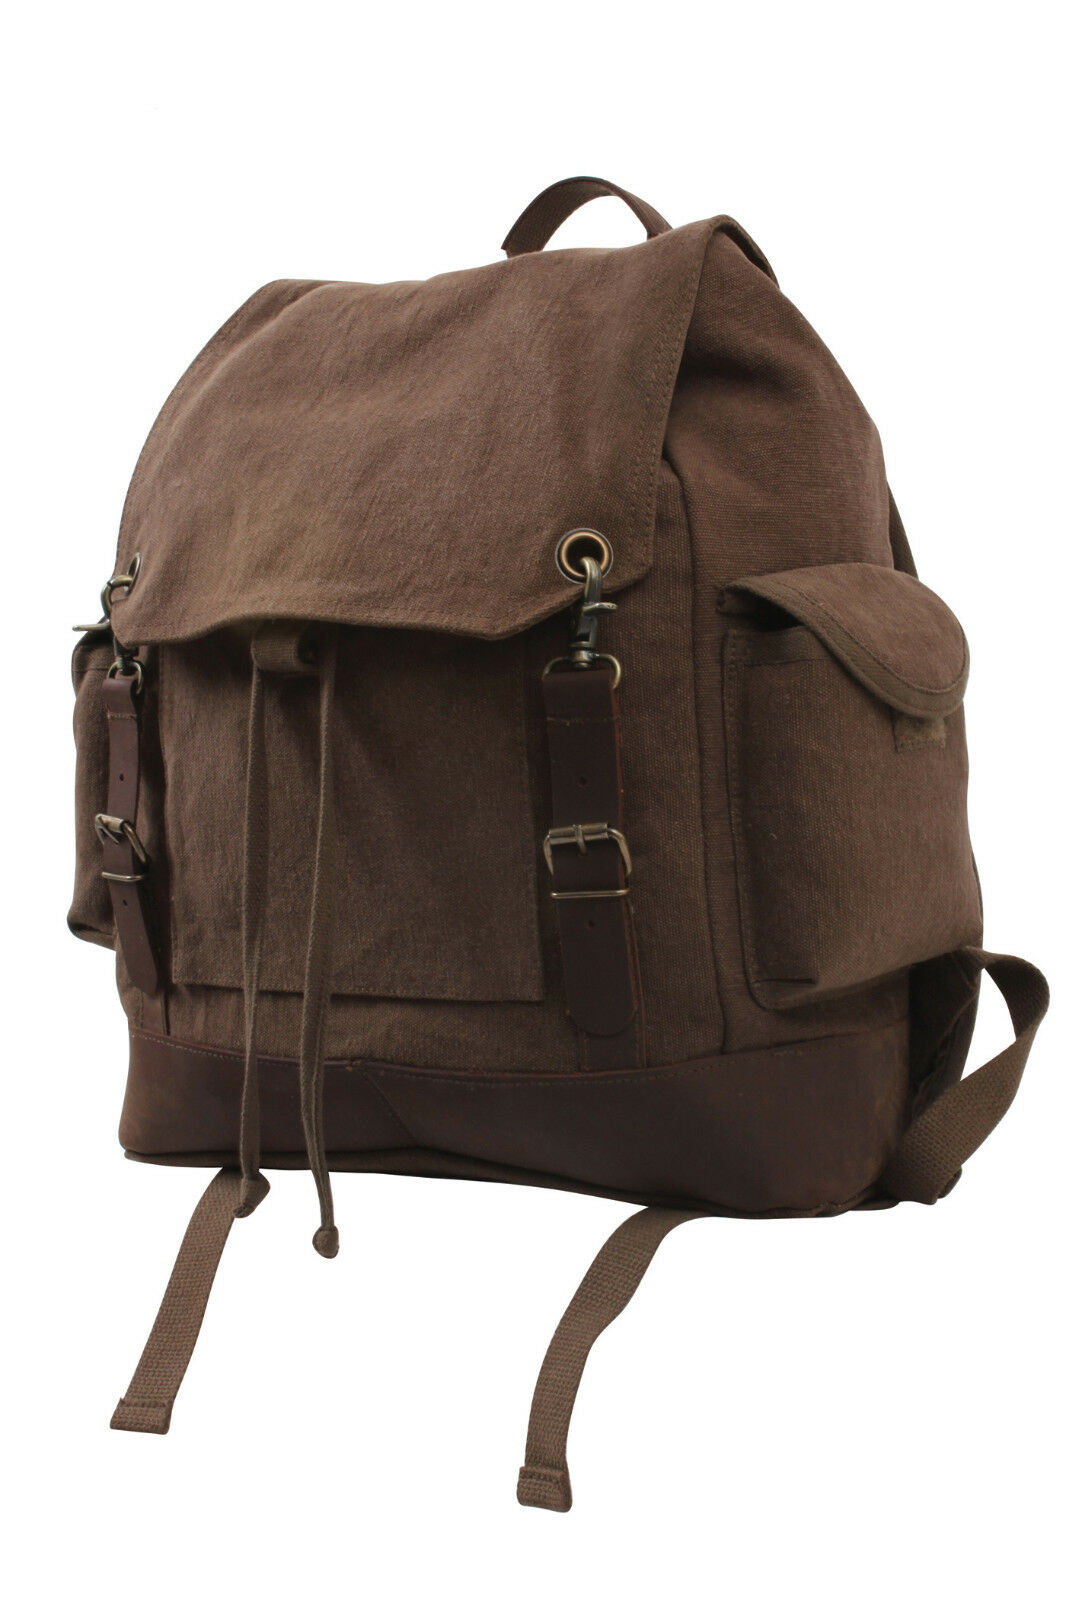 Rothco Vintage Expedition Rucksack - Multiple Colors